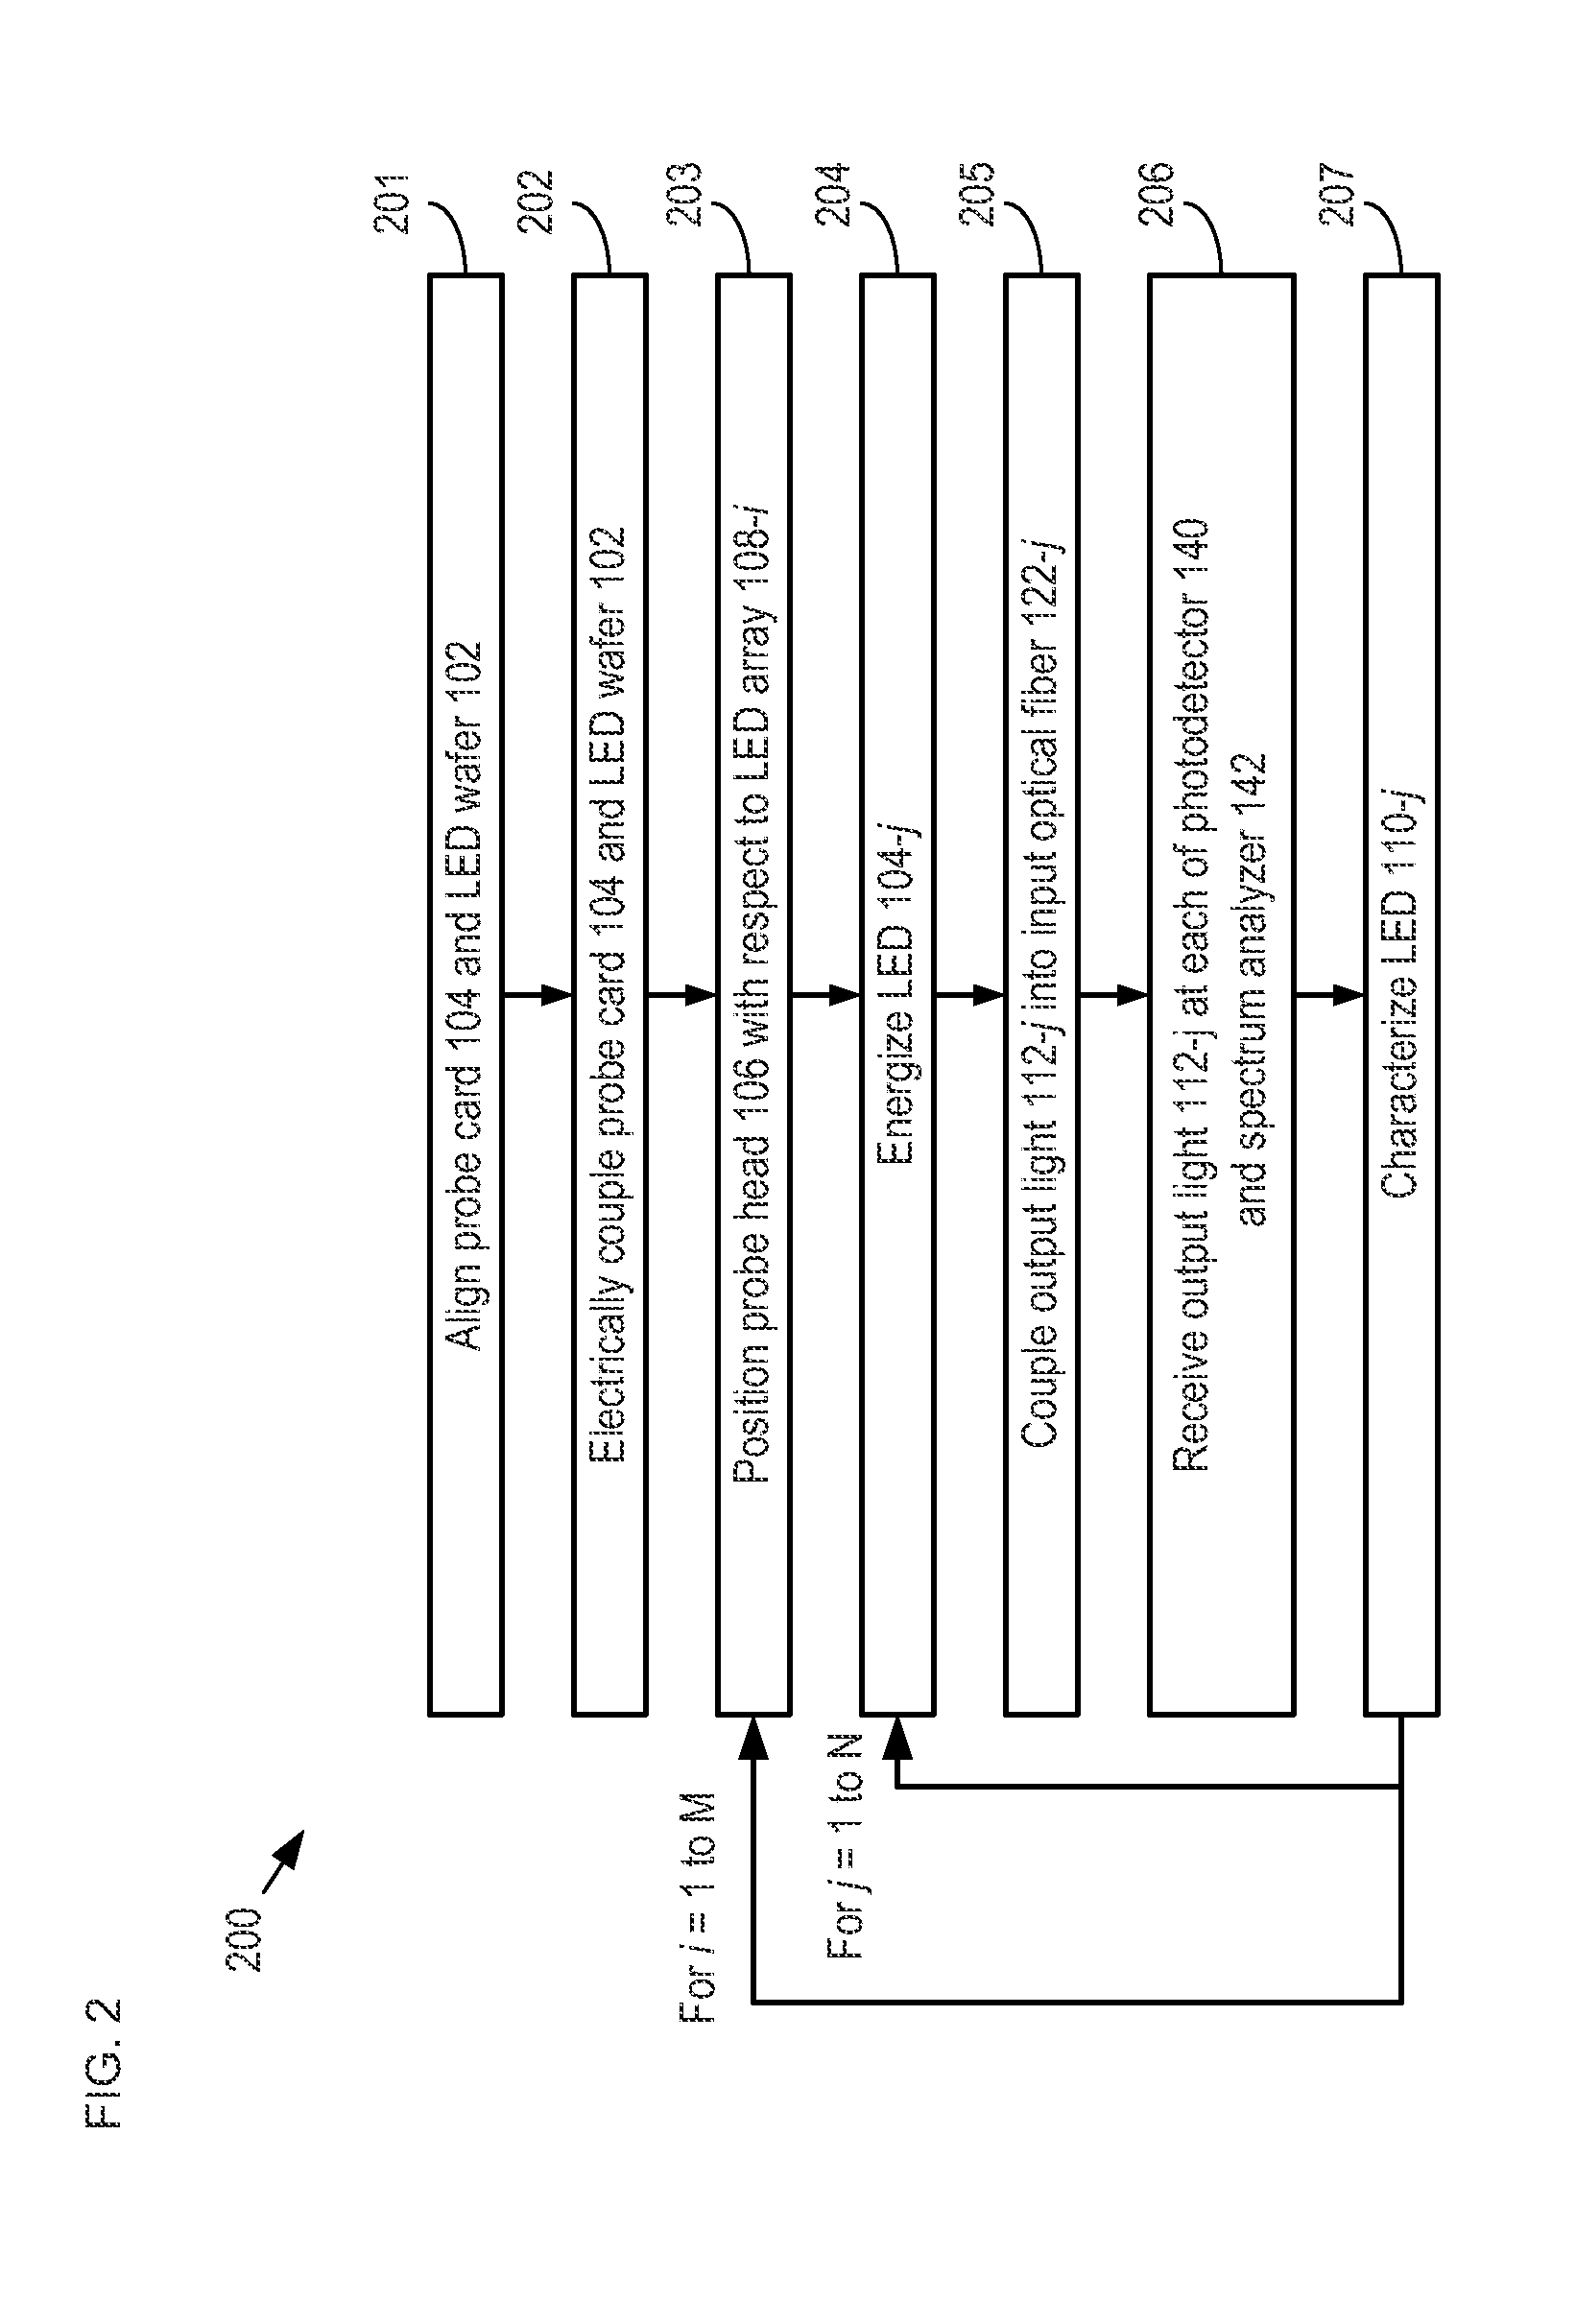 Optoelectronic-Device Wafer Probe and Method Therefor